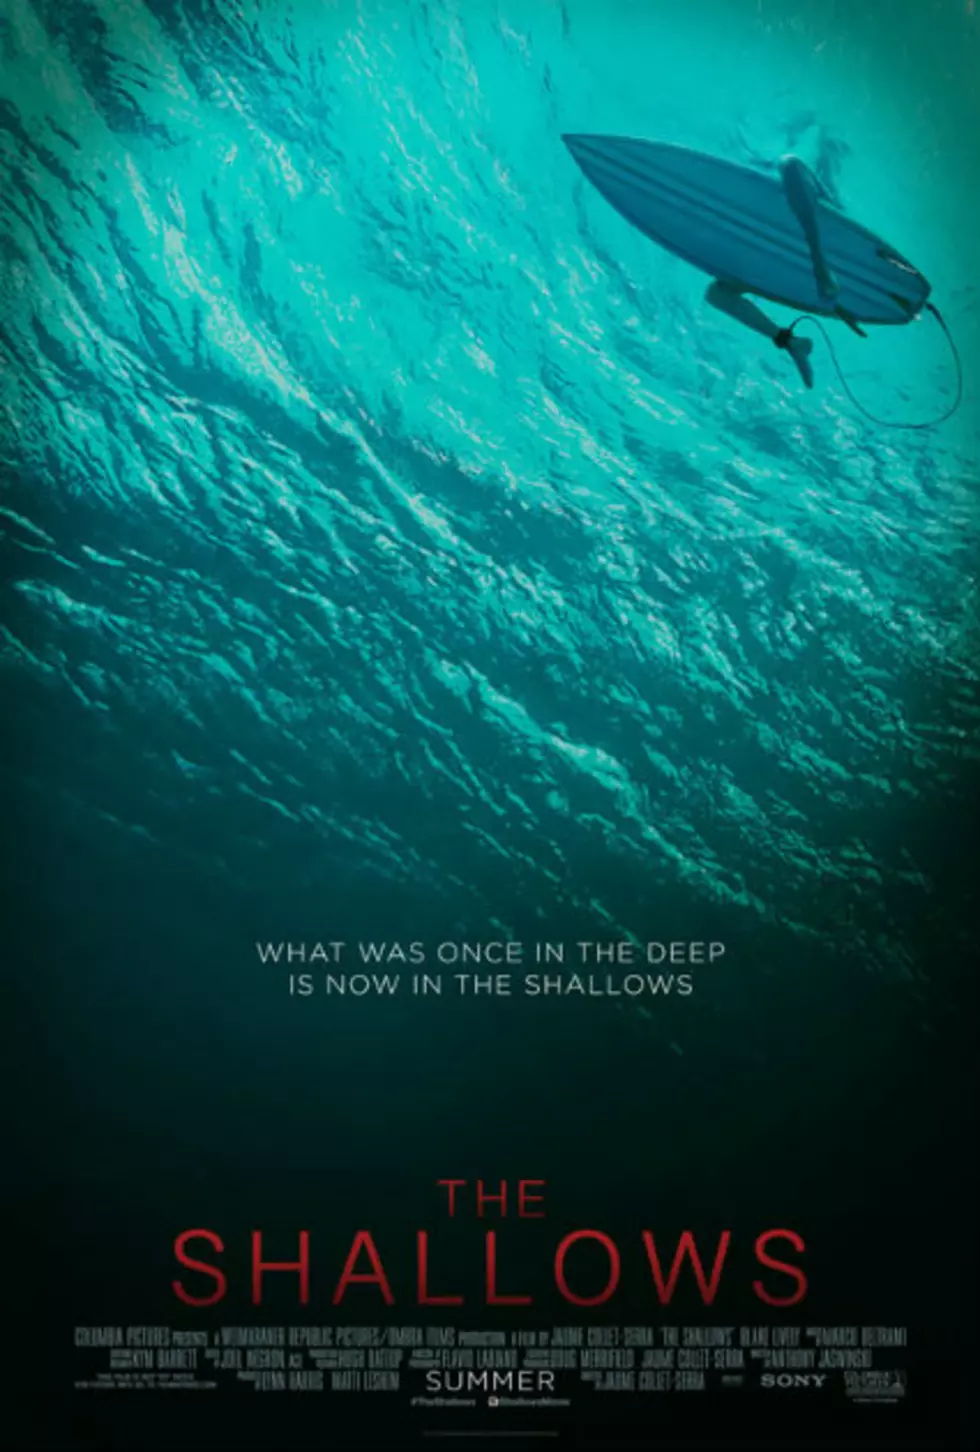 Watch The Trailer And Read My Take On Summer Shark Thriller ‘The Shallows’